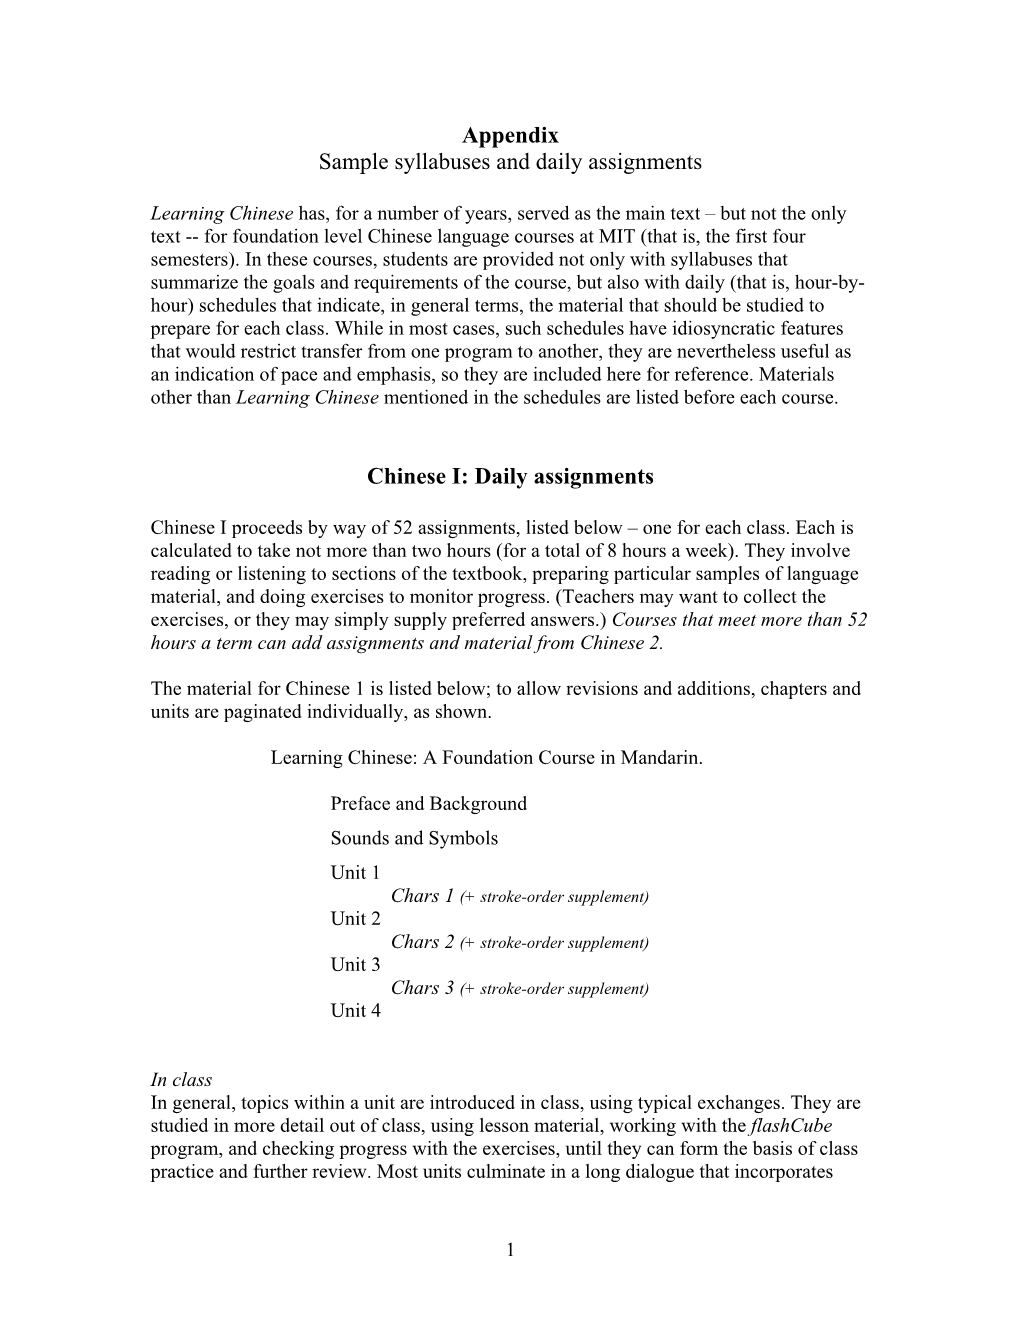 Appendix Sample Syllabuses and Daily Assignments Chinese I